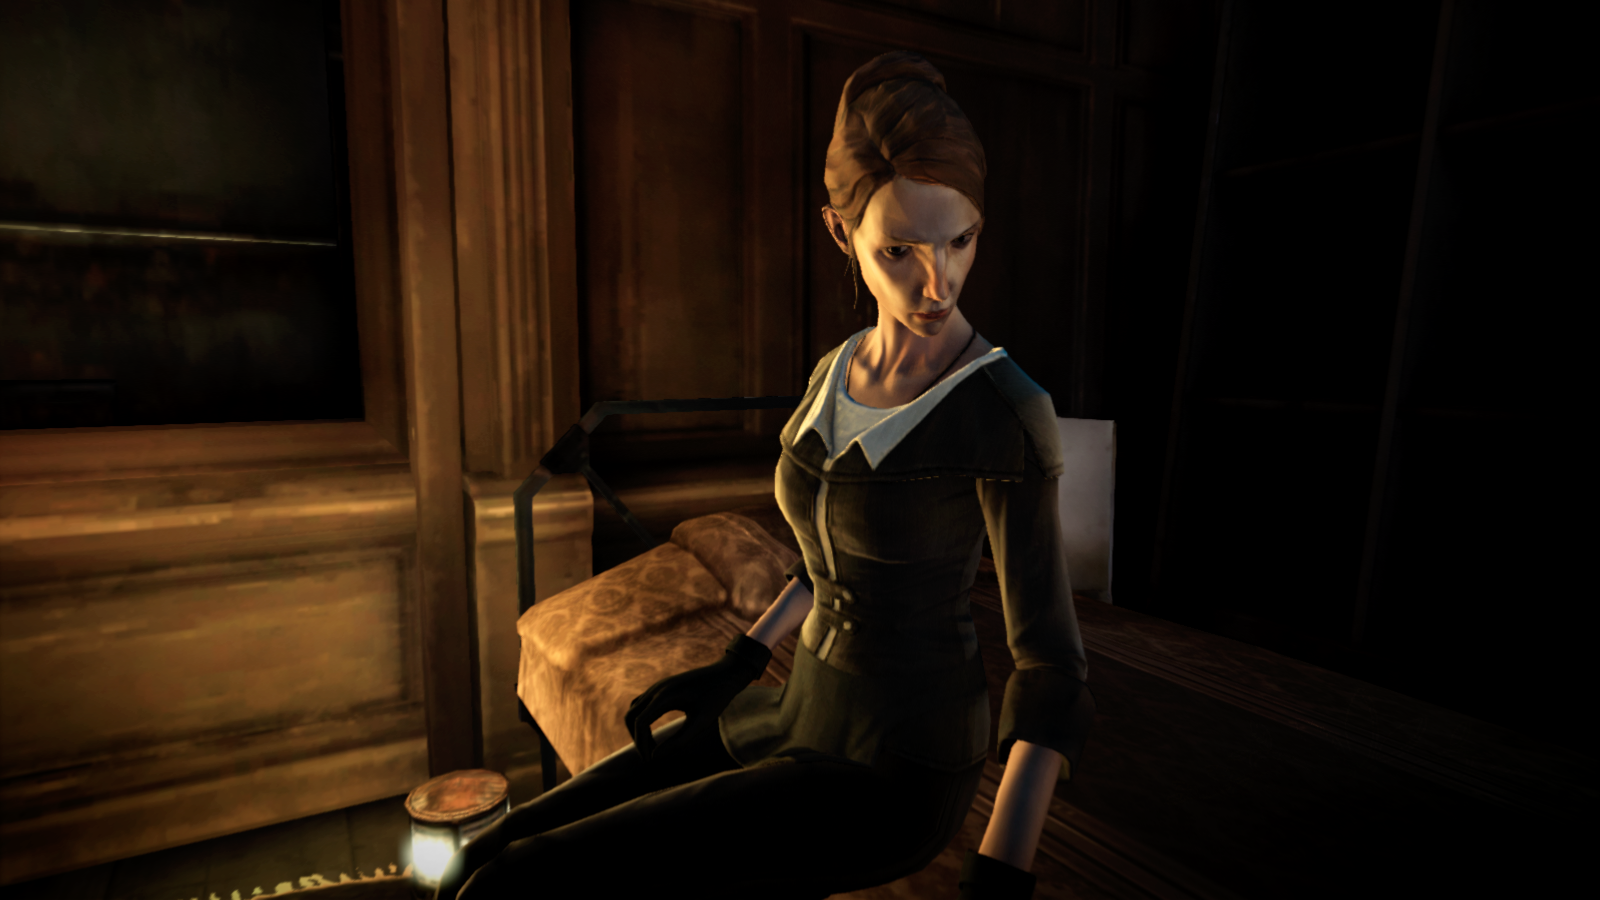 Callista's Plea is an audiograph found in Dishonored, recorded by Callista...